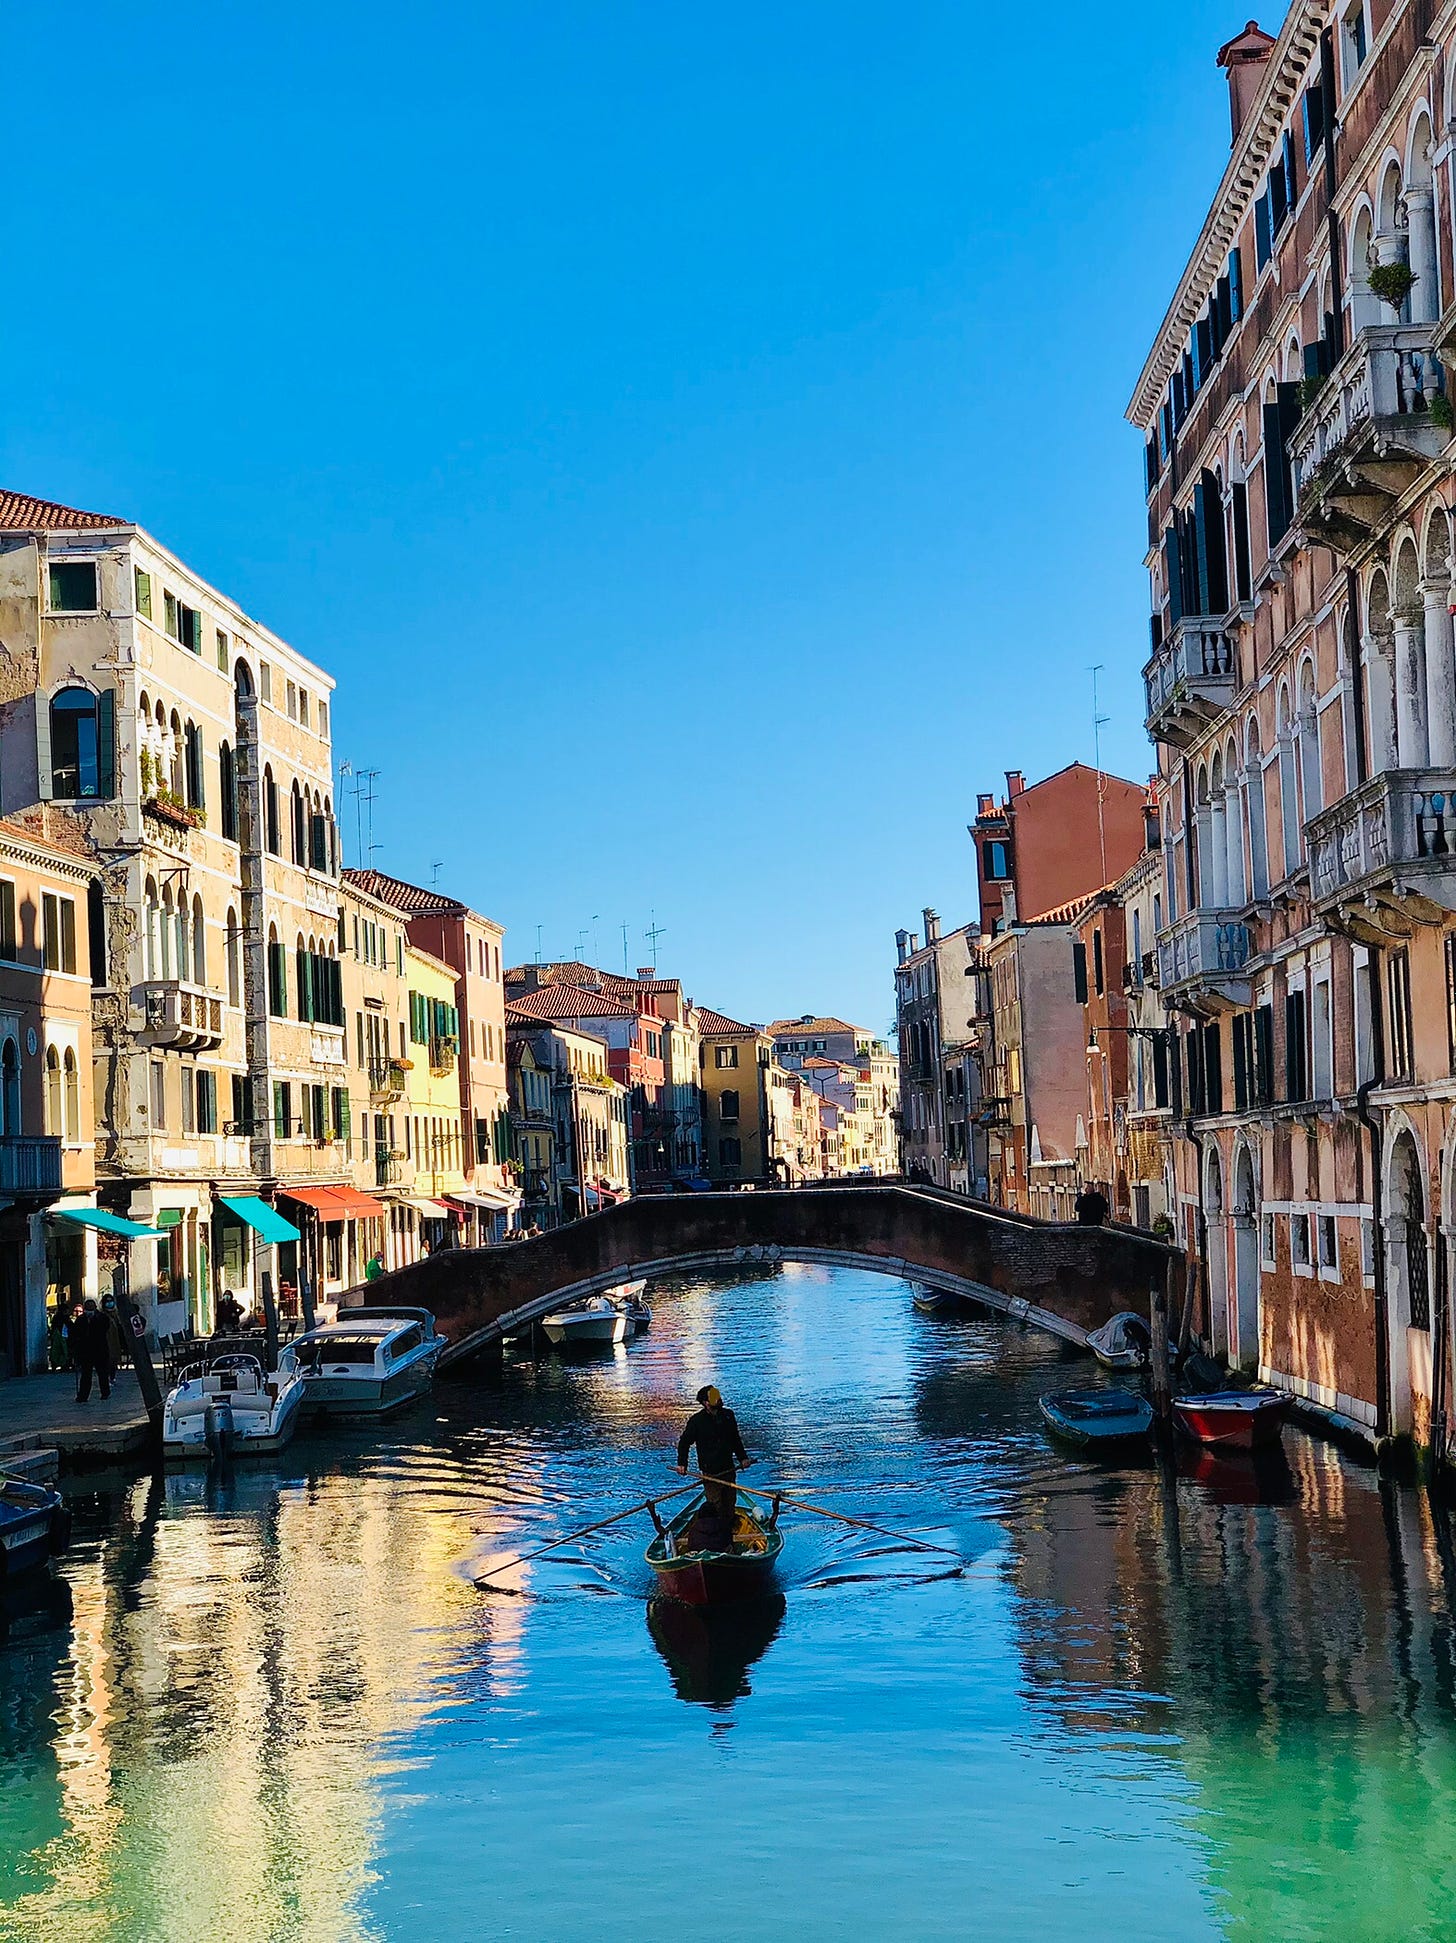 A canal in Venice, Italy lined with buildings typical of Venice architecture.